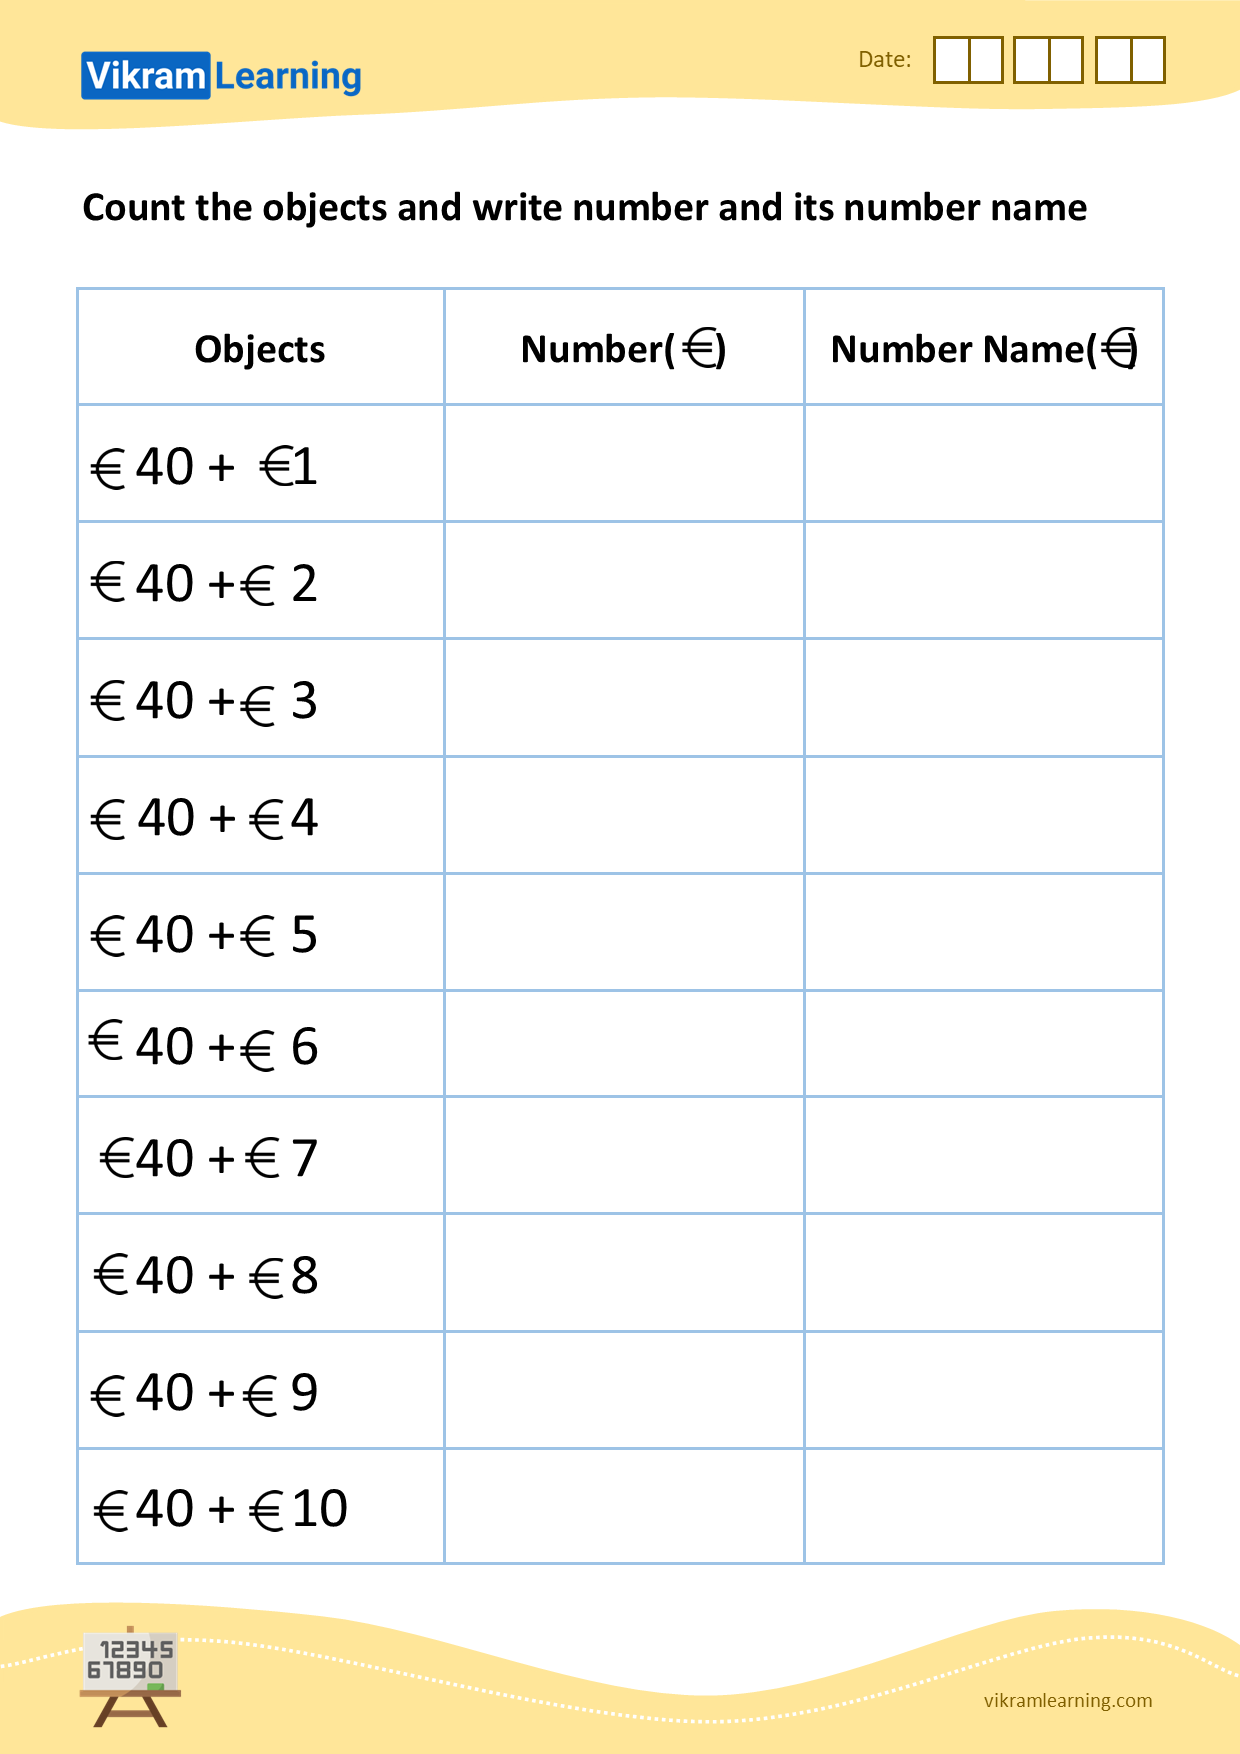 Download count the objects and write number and its number name - 4 worksheets